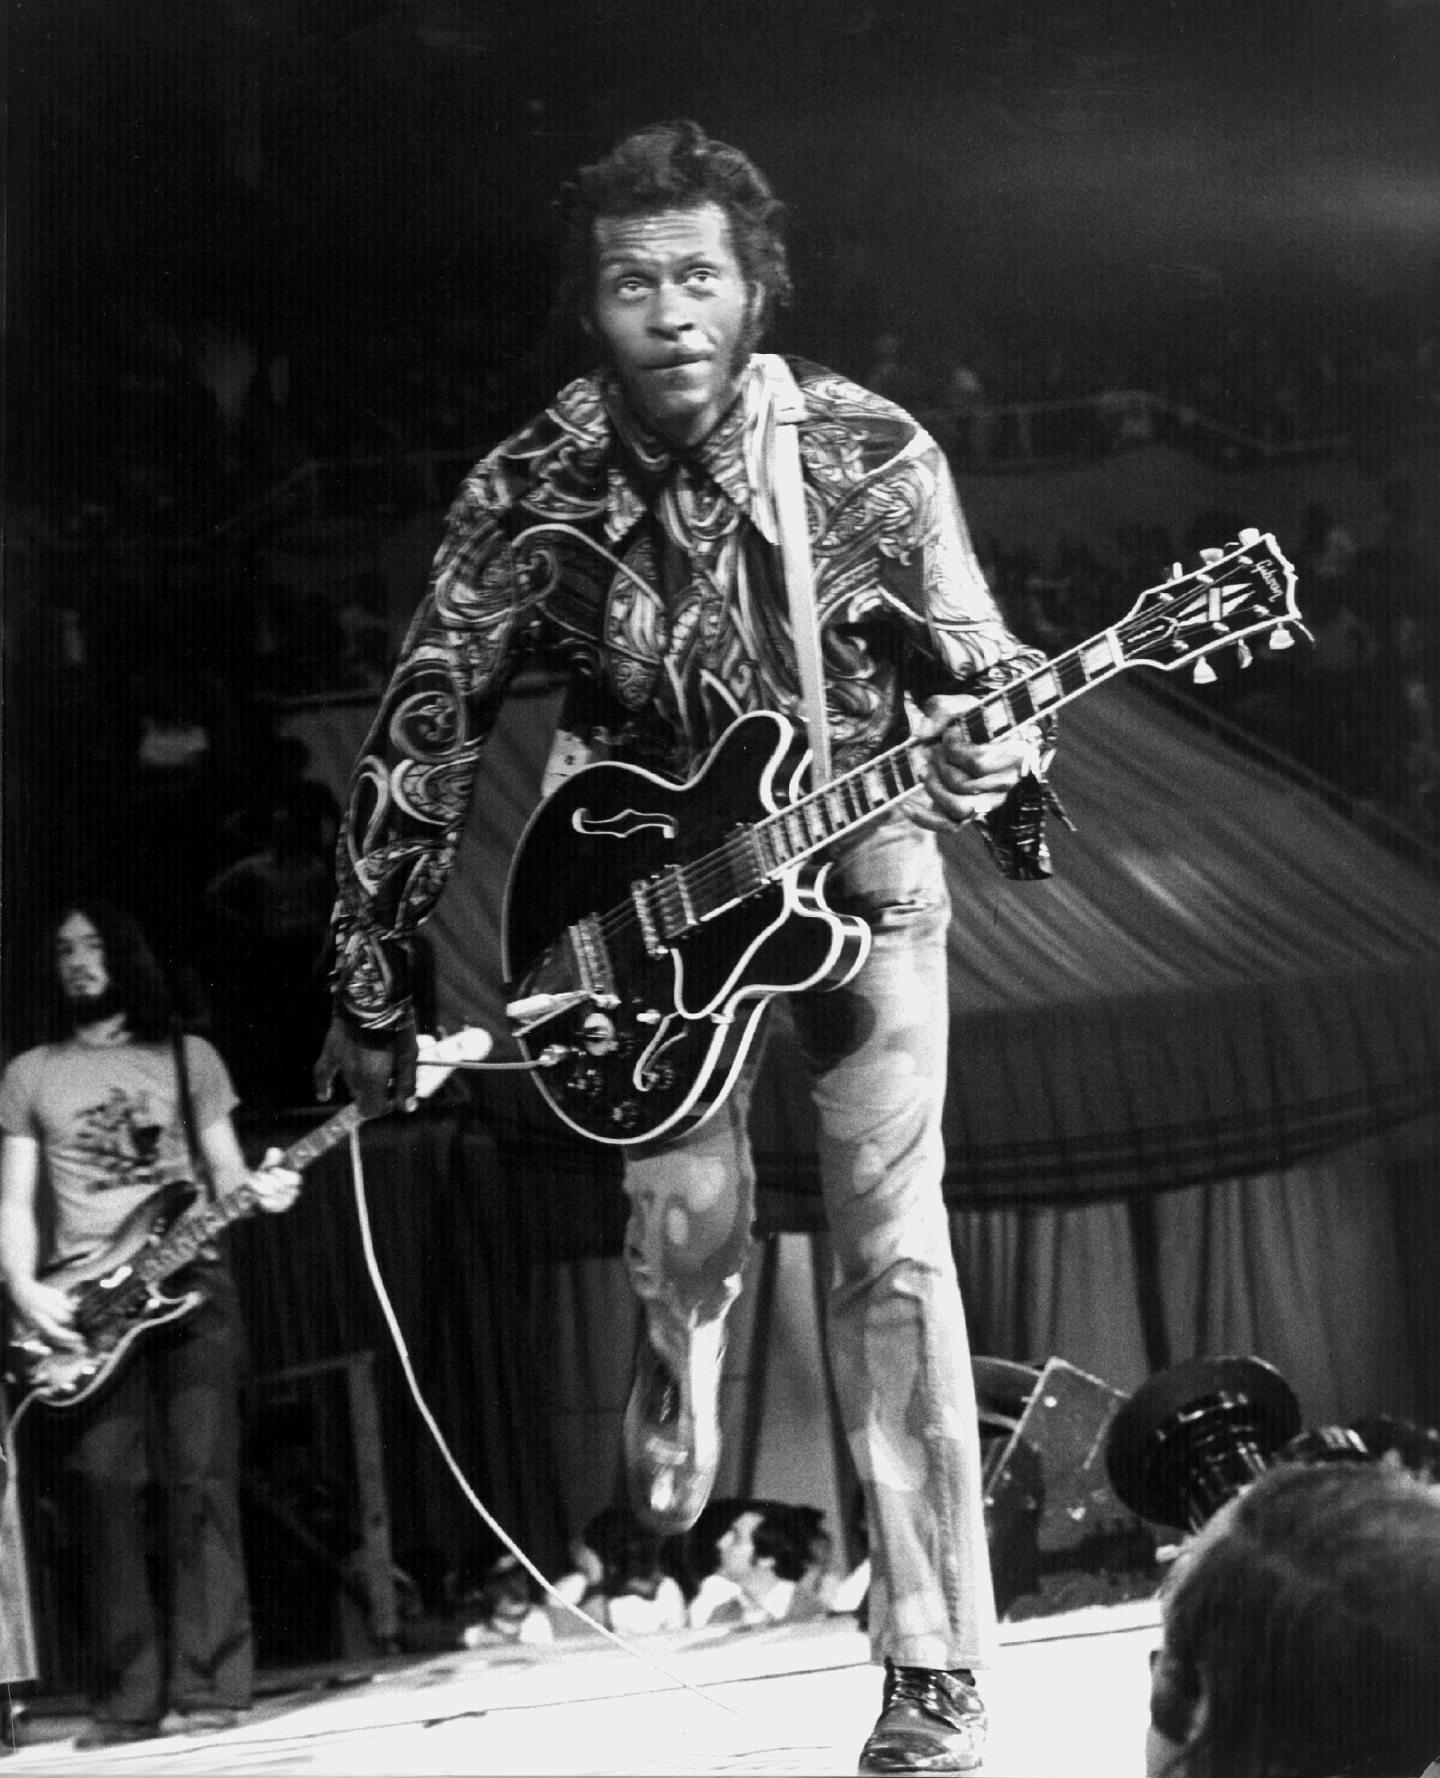 "Quite a character": Chuck Berry.